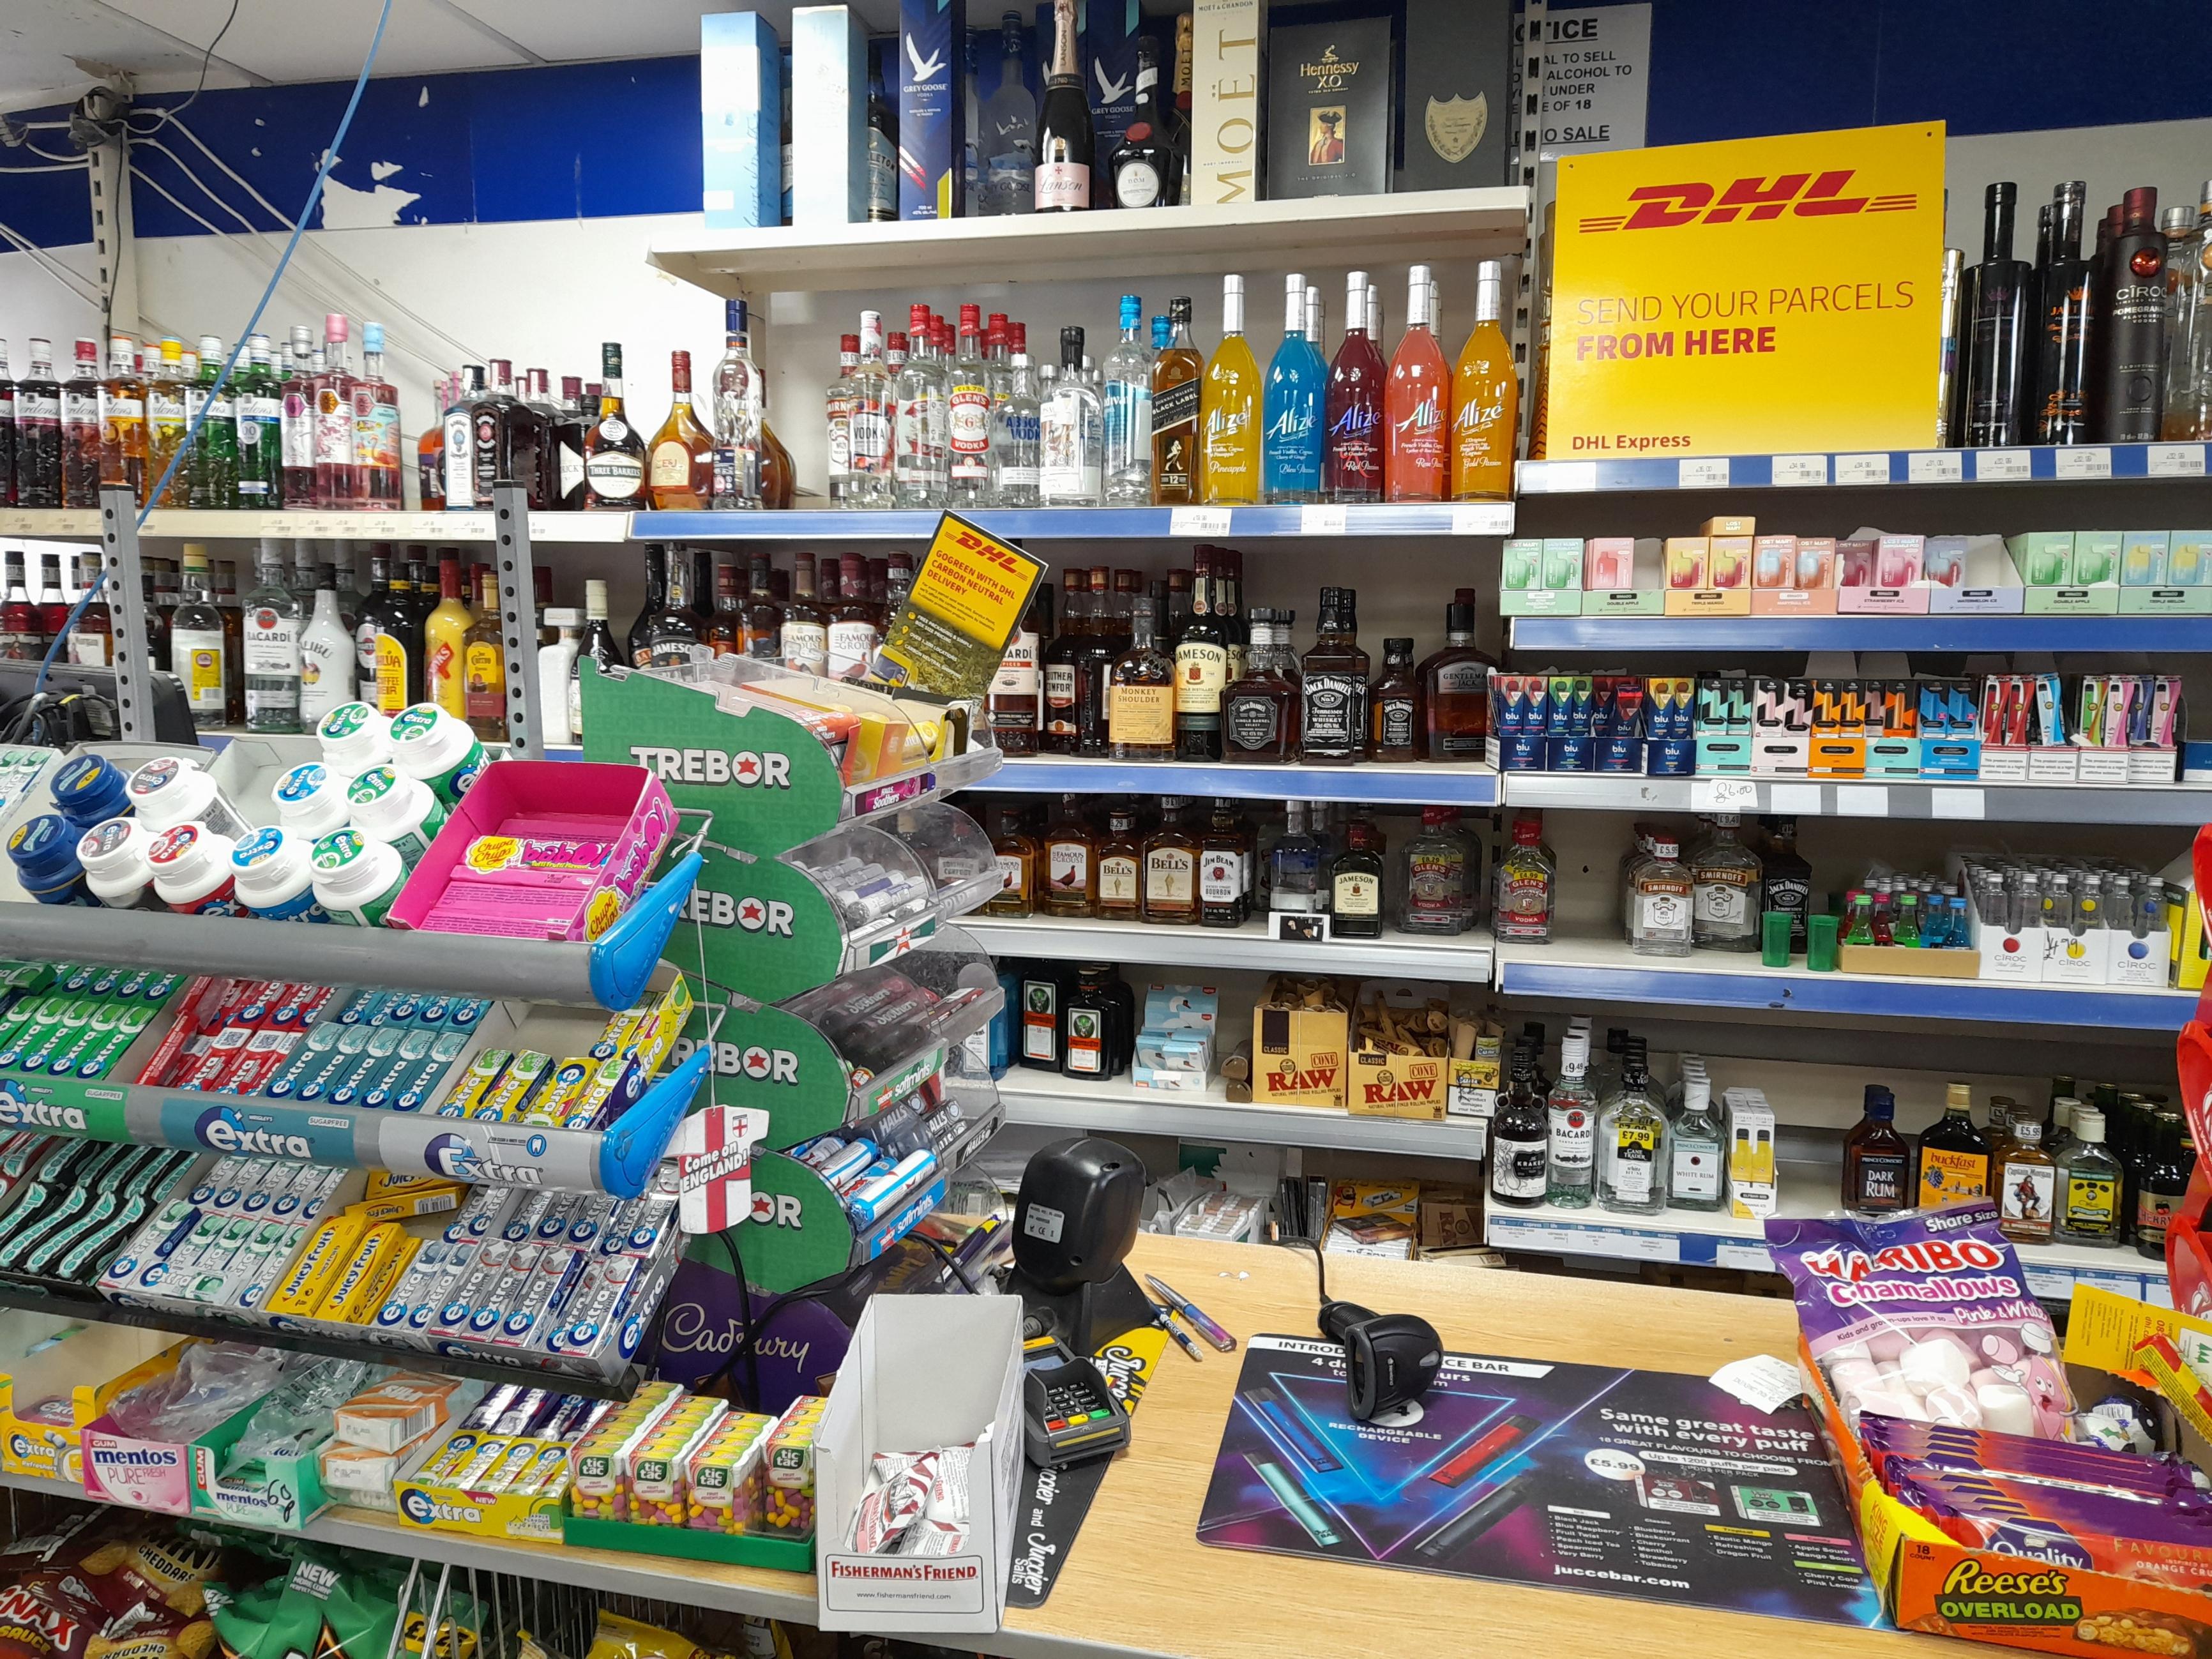 Images DHL Express Service Point (Haydn Road Convenience Store)